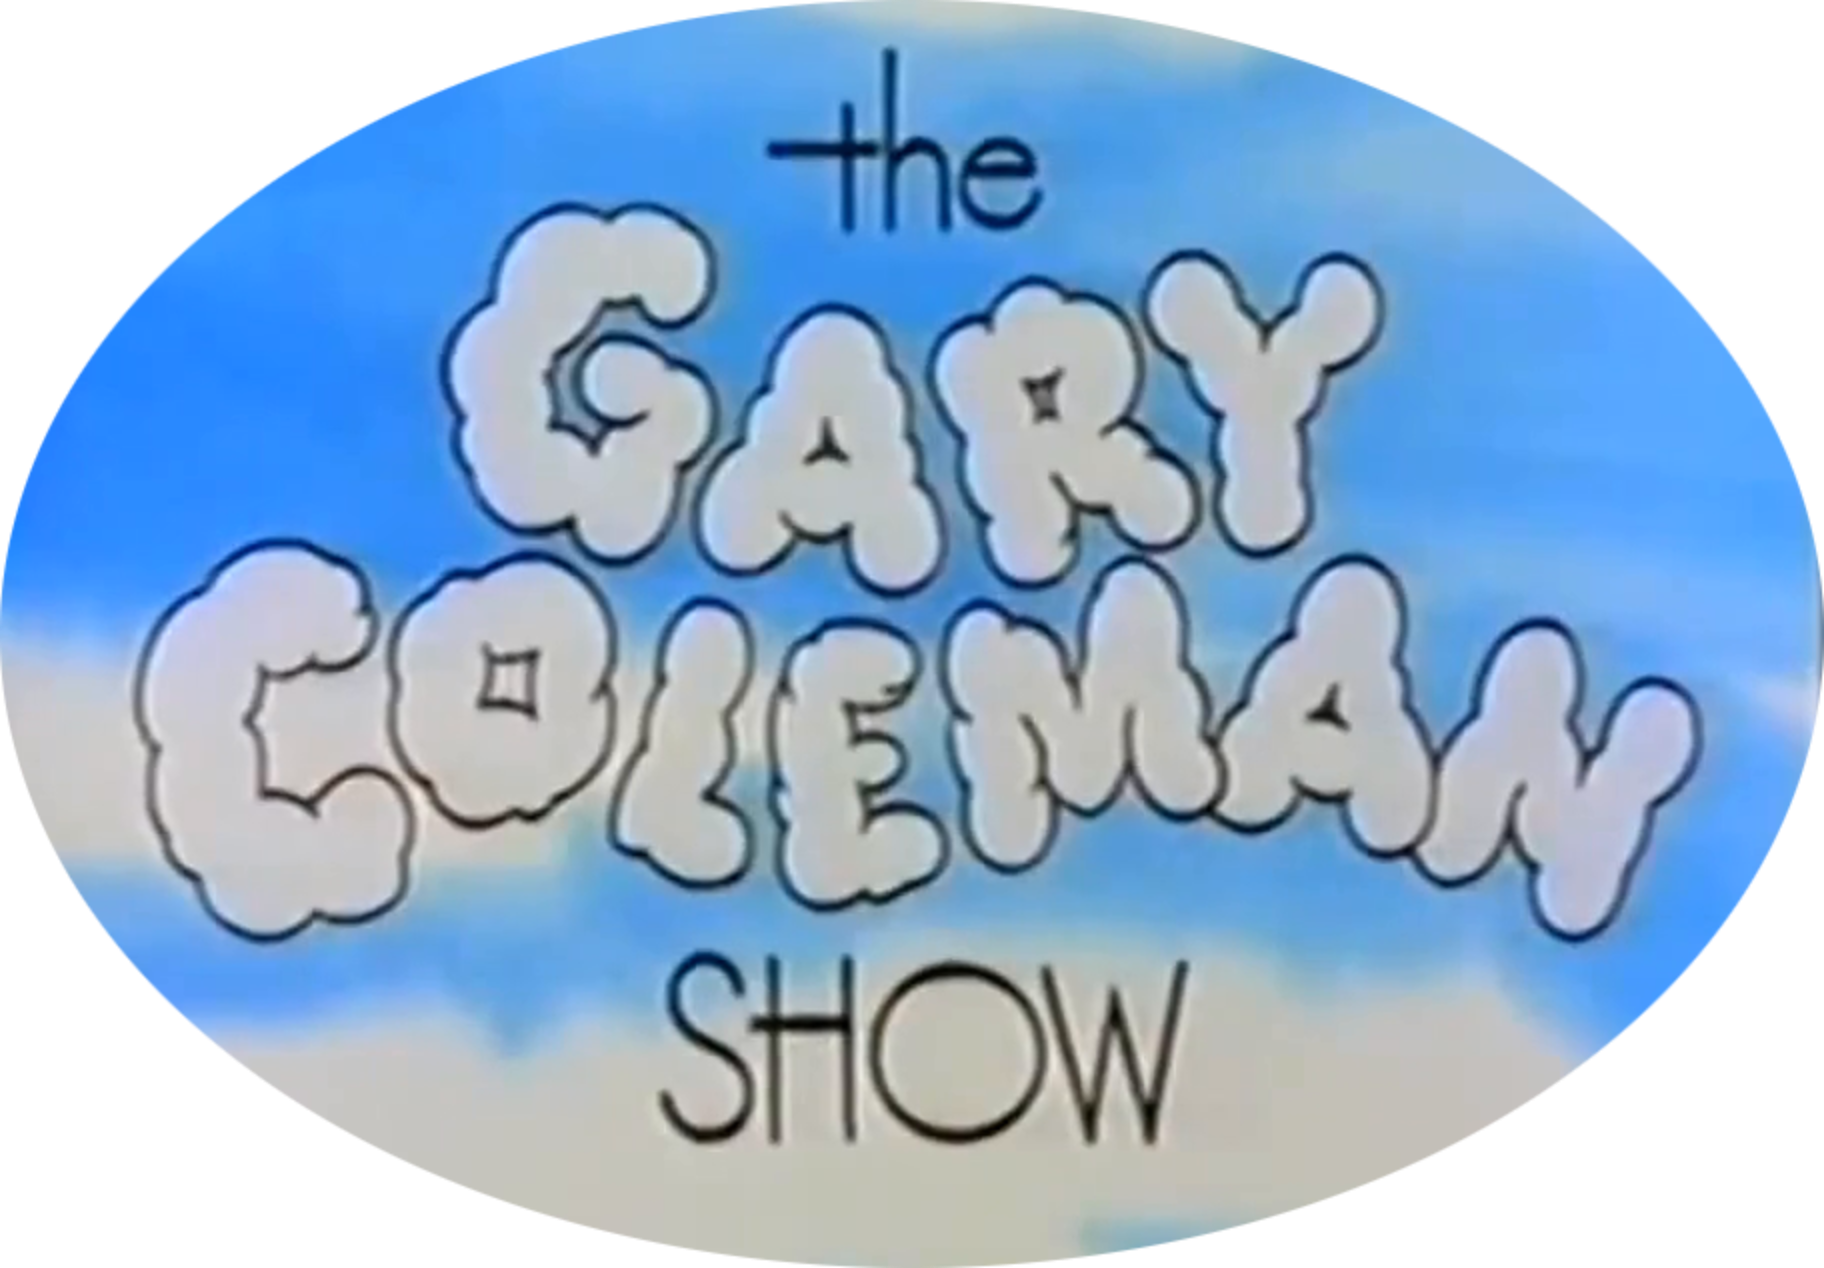 The Gary Coleman Show